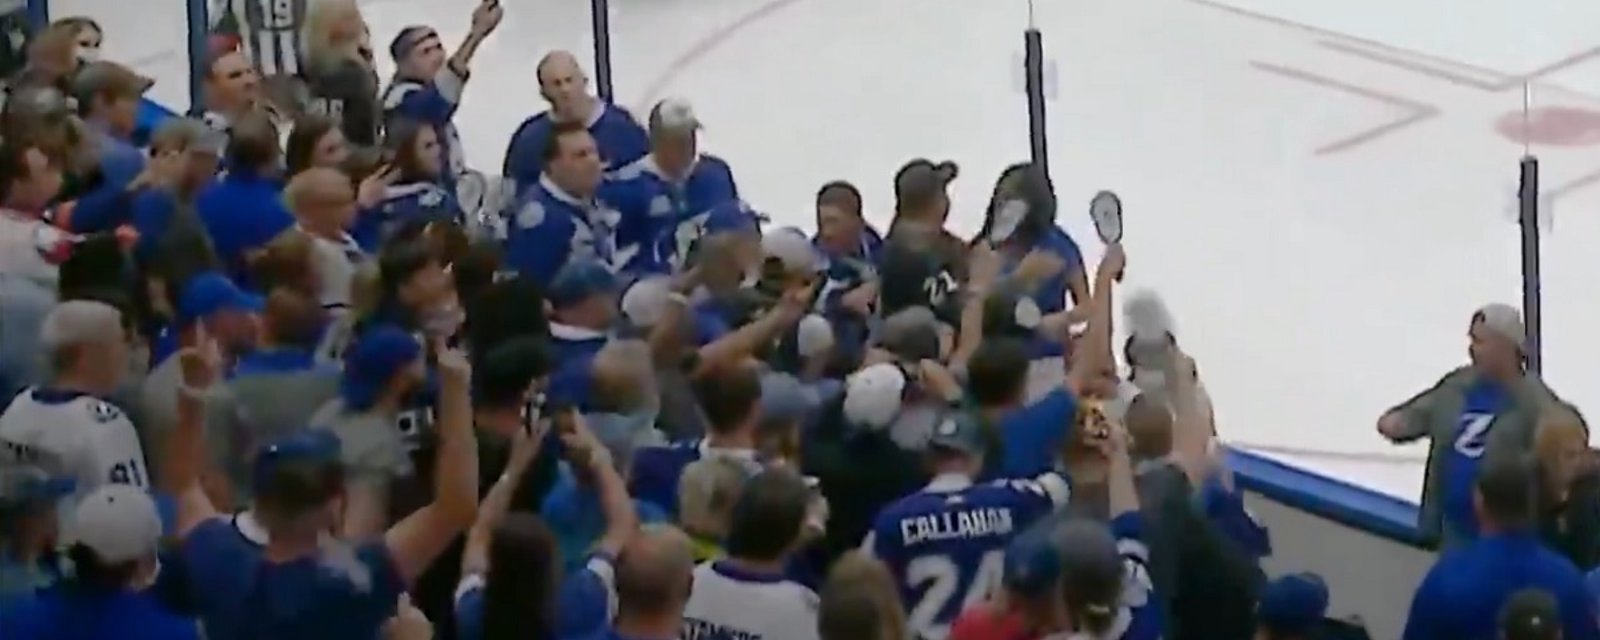 Brawl breaks out between fans in the crowd for Game 7.